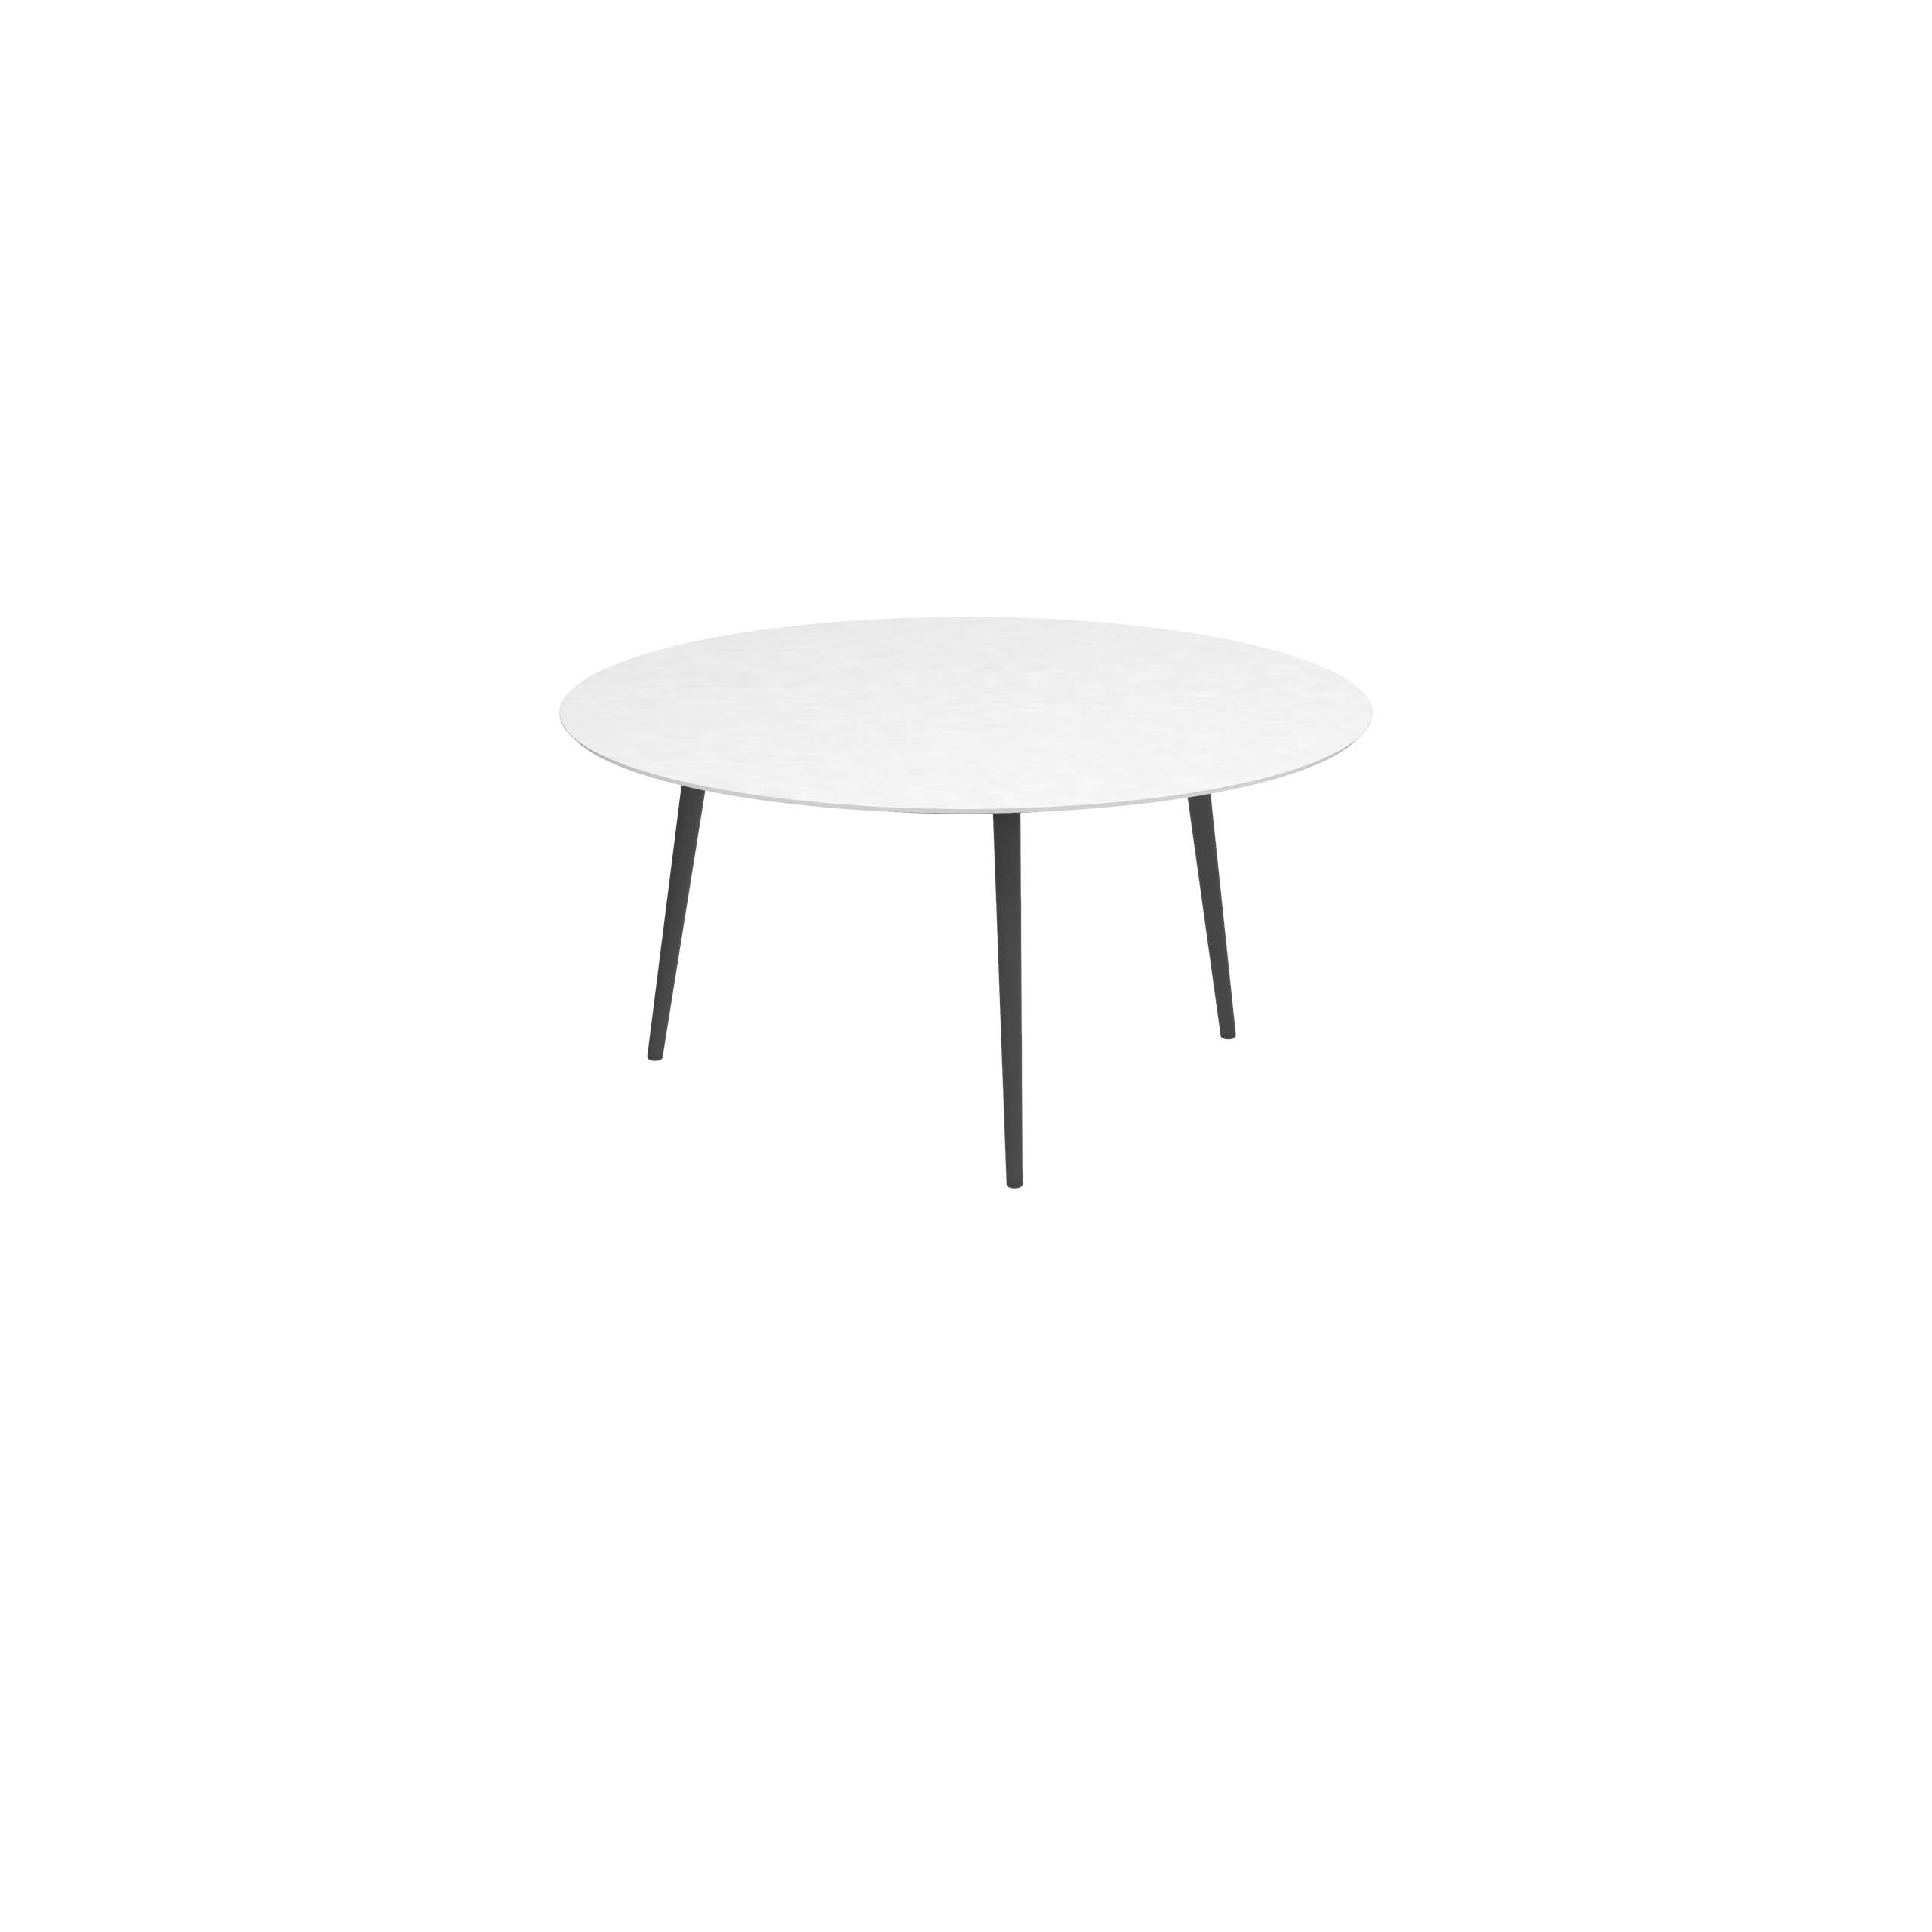 Styletto Standard Dining Table Ø 160cm Alu Legs Anthracite Ceramic Top White